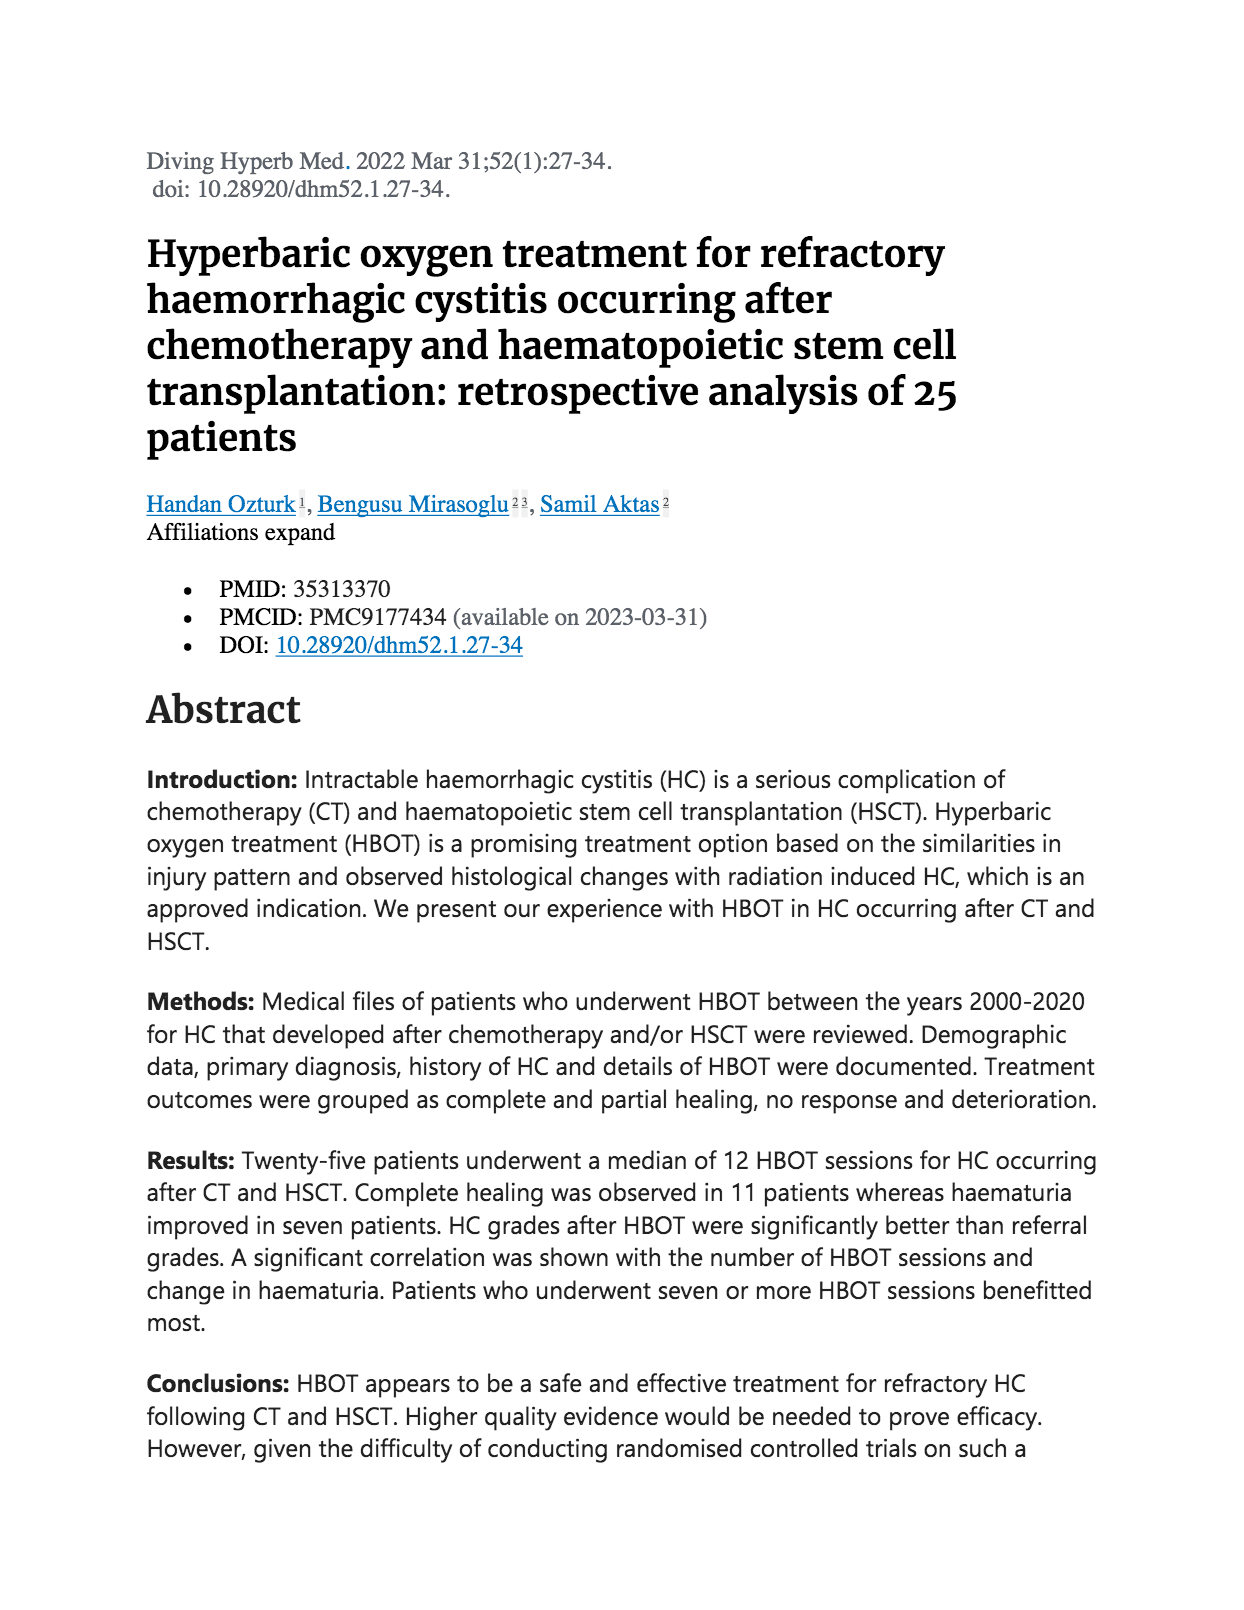 hyperbaric oxygen treatment for refractory haemorrhagic cystitis, occurring after chemotherapy, haematopoietic cell transplantation, cancer, radiation damage